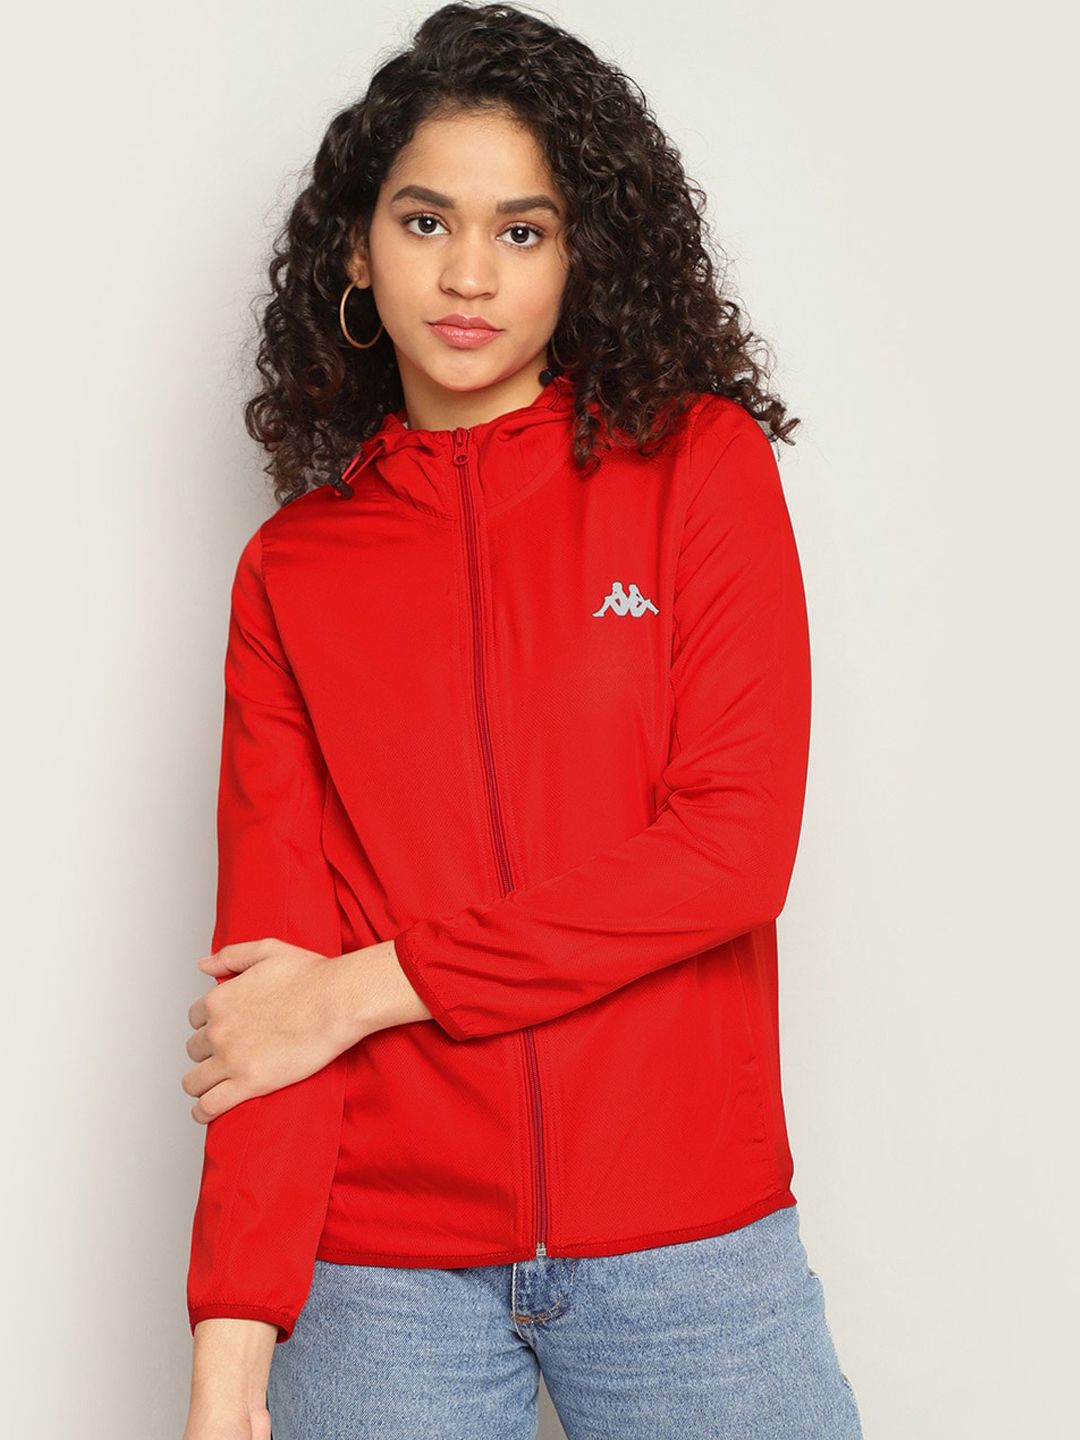 Kappa Women Red Colourblocked Sporty Jacket Price in India